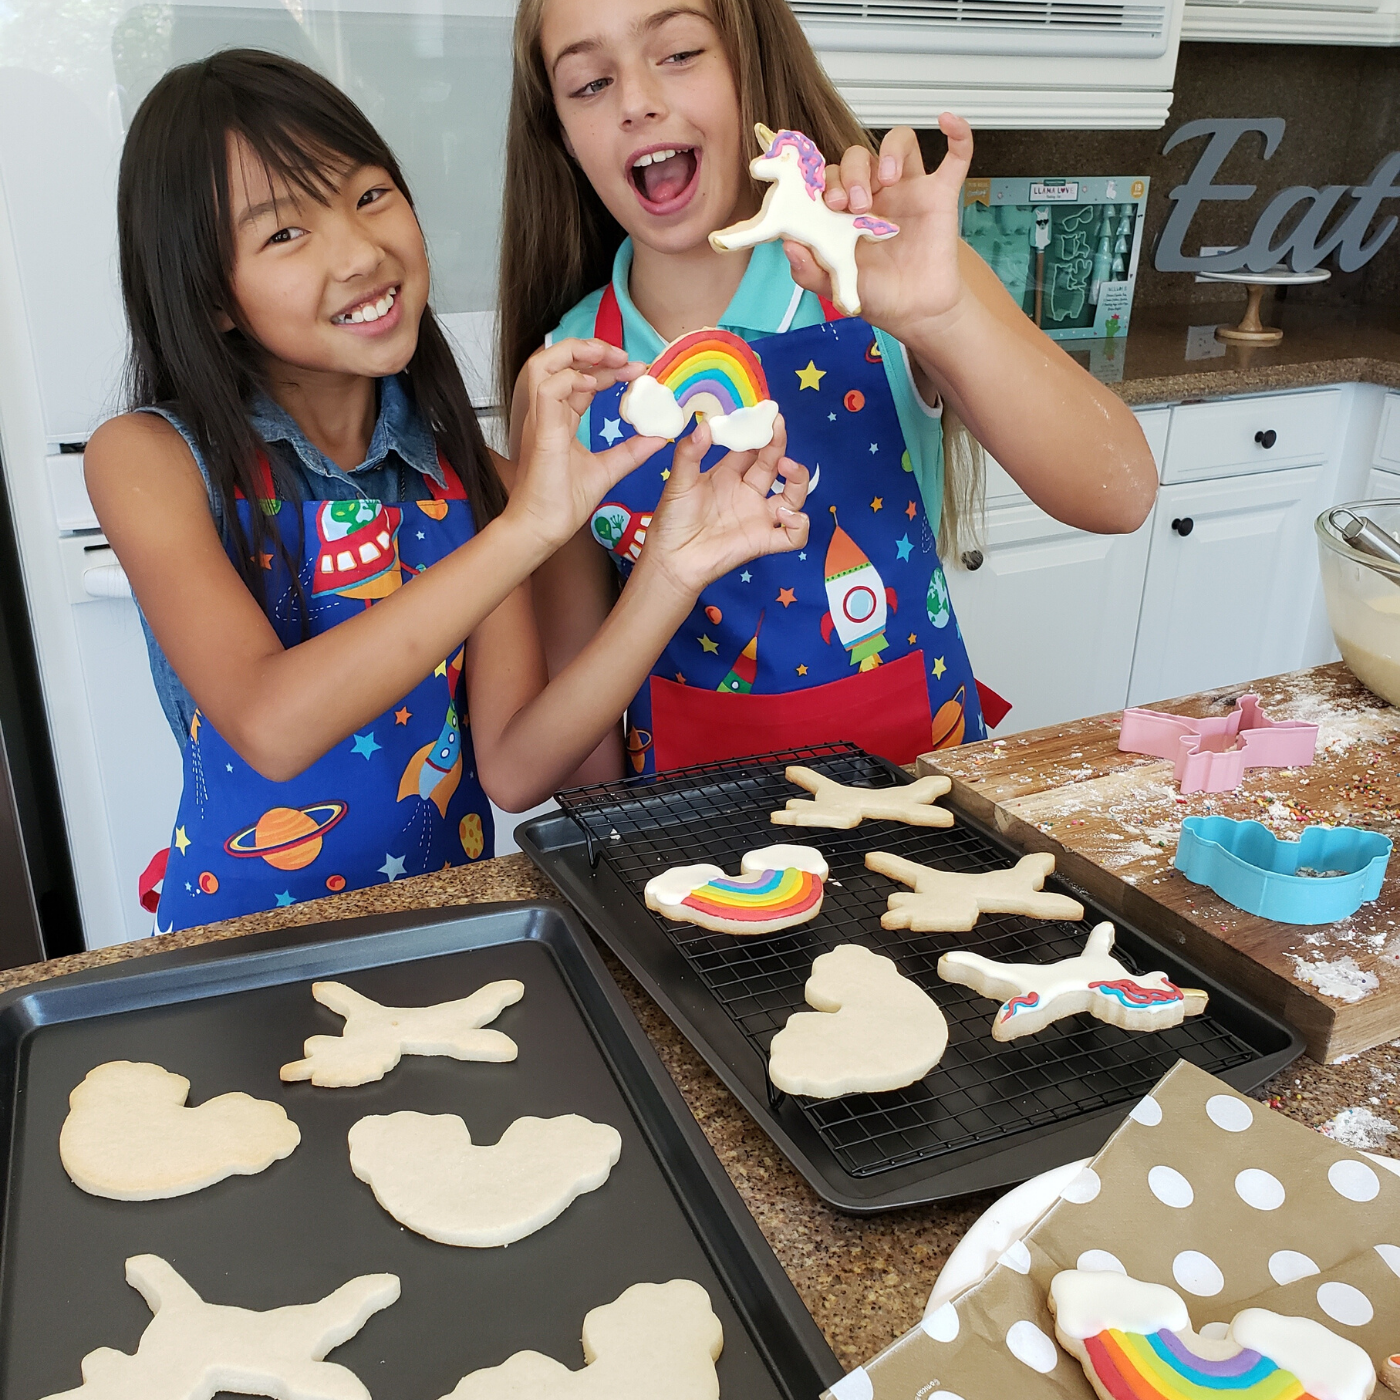 Lifestyle image of two girls showing finished product of unicorn and rainbow cookies.